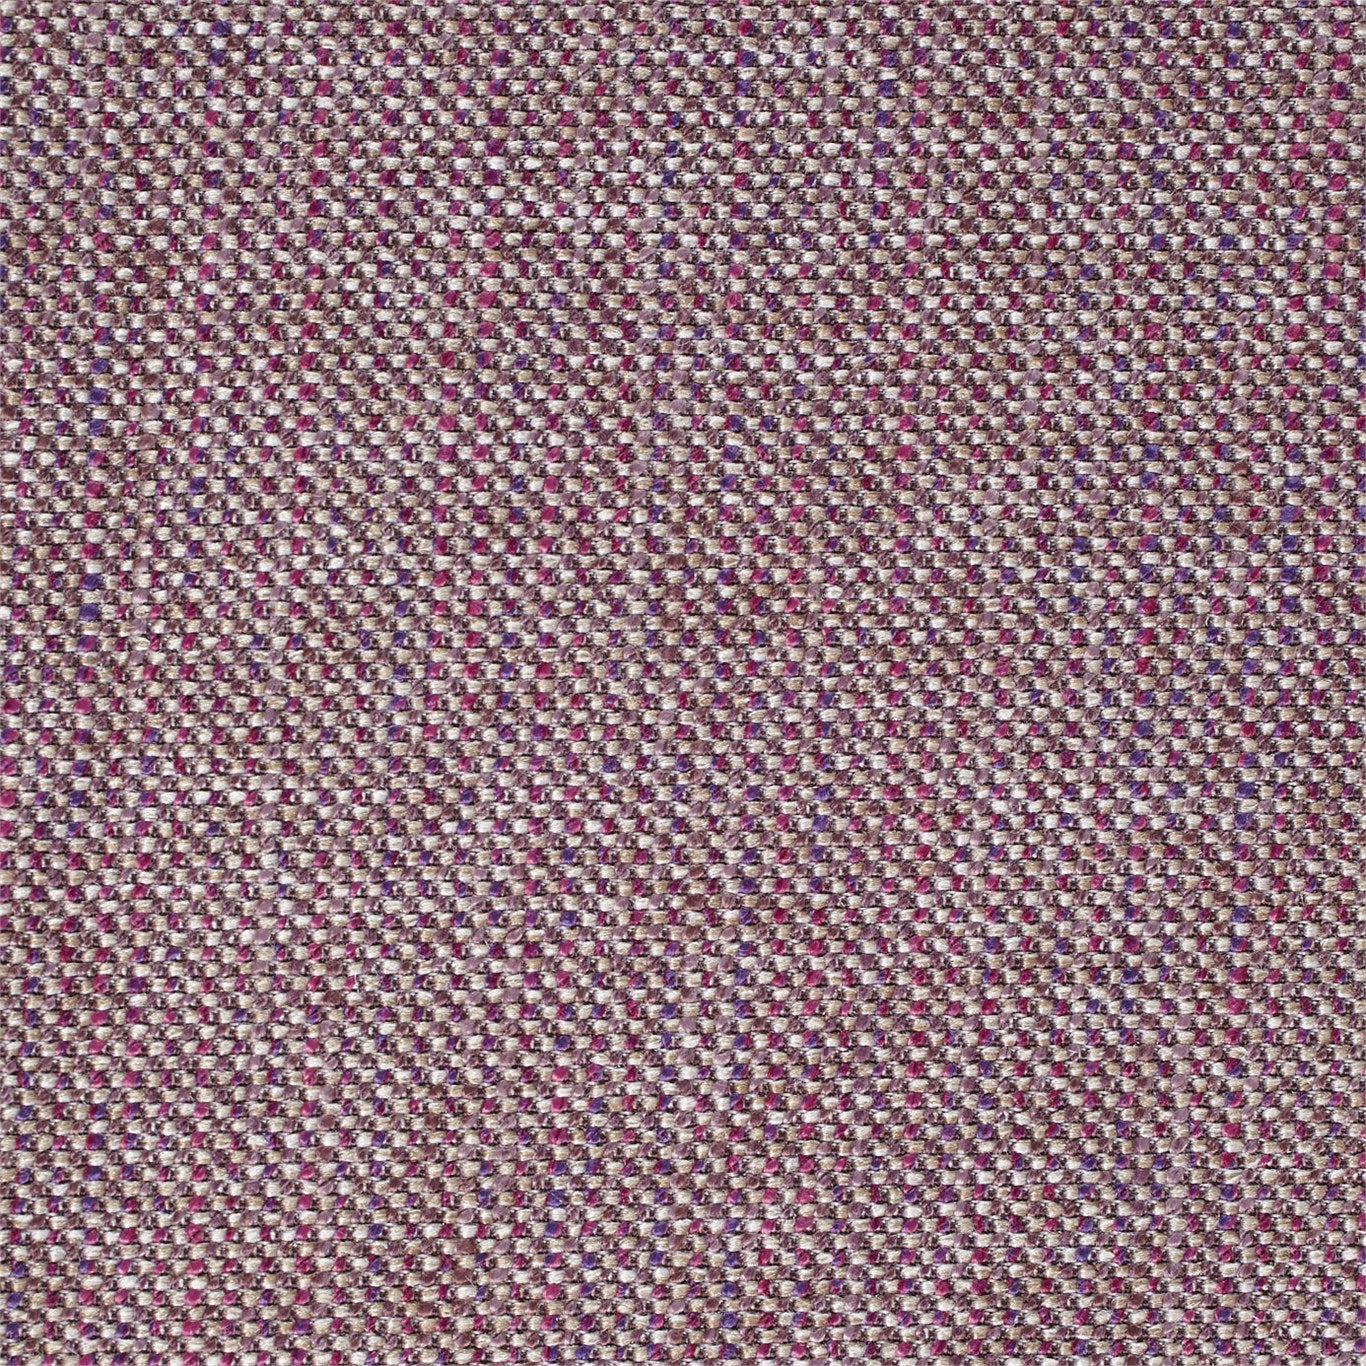 Risan Fabric by Harlequin